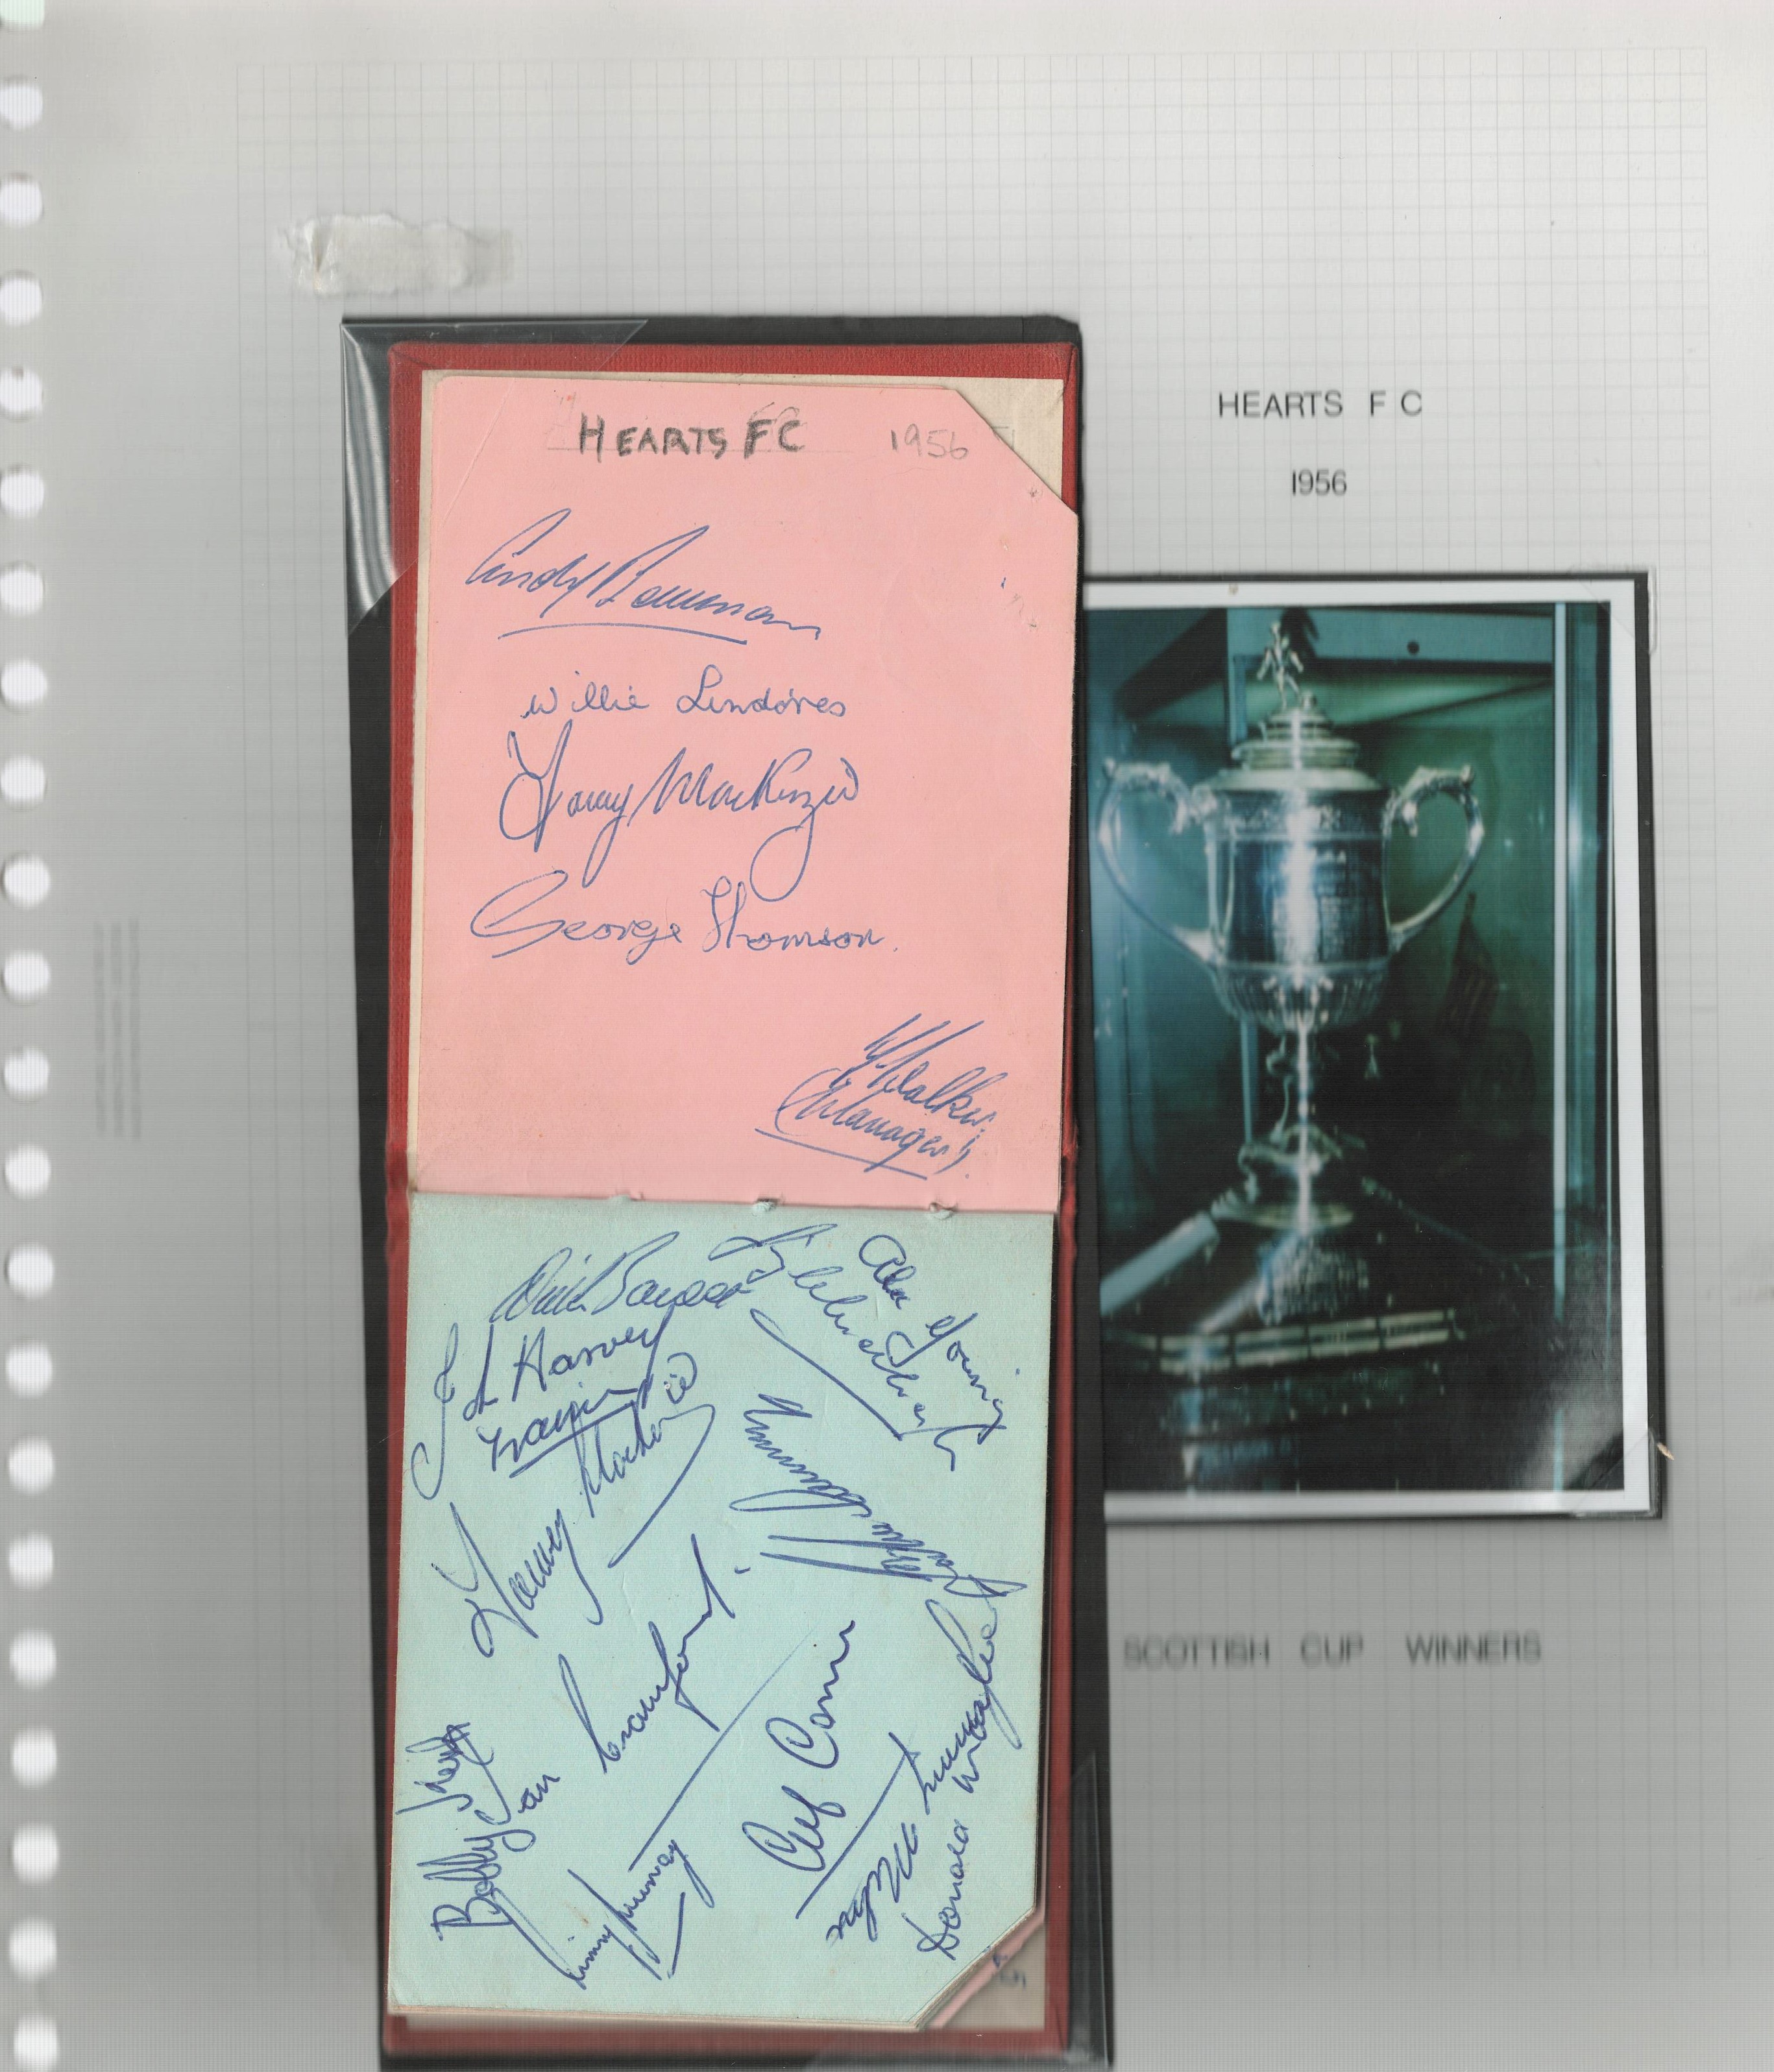 Football Hearts 1956 Scottish Cup winners 17 autographs in autograph album. Includes Tommy Walker,